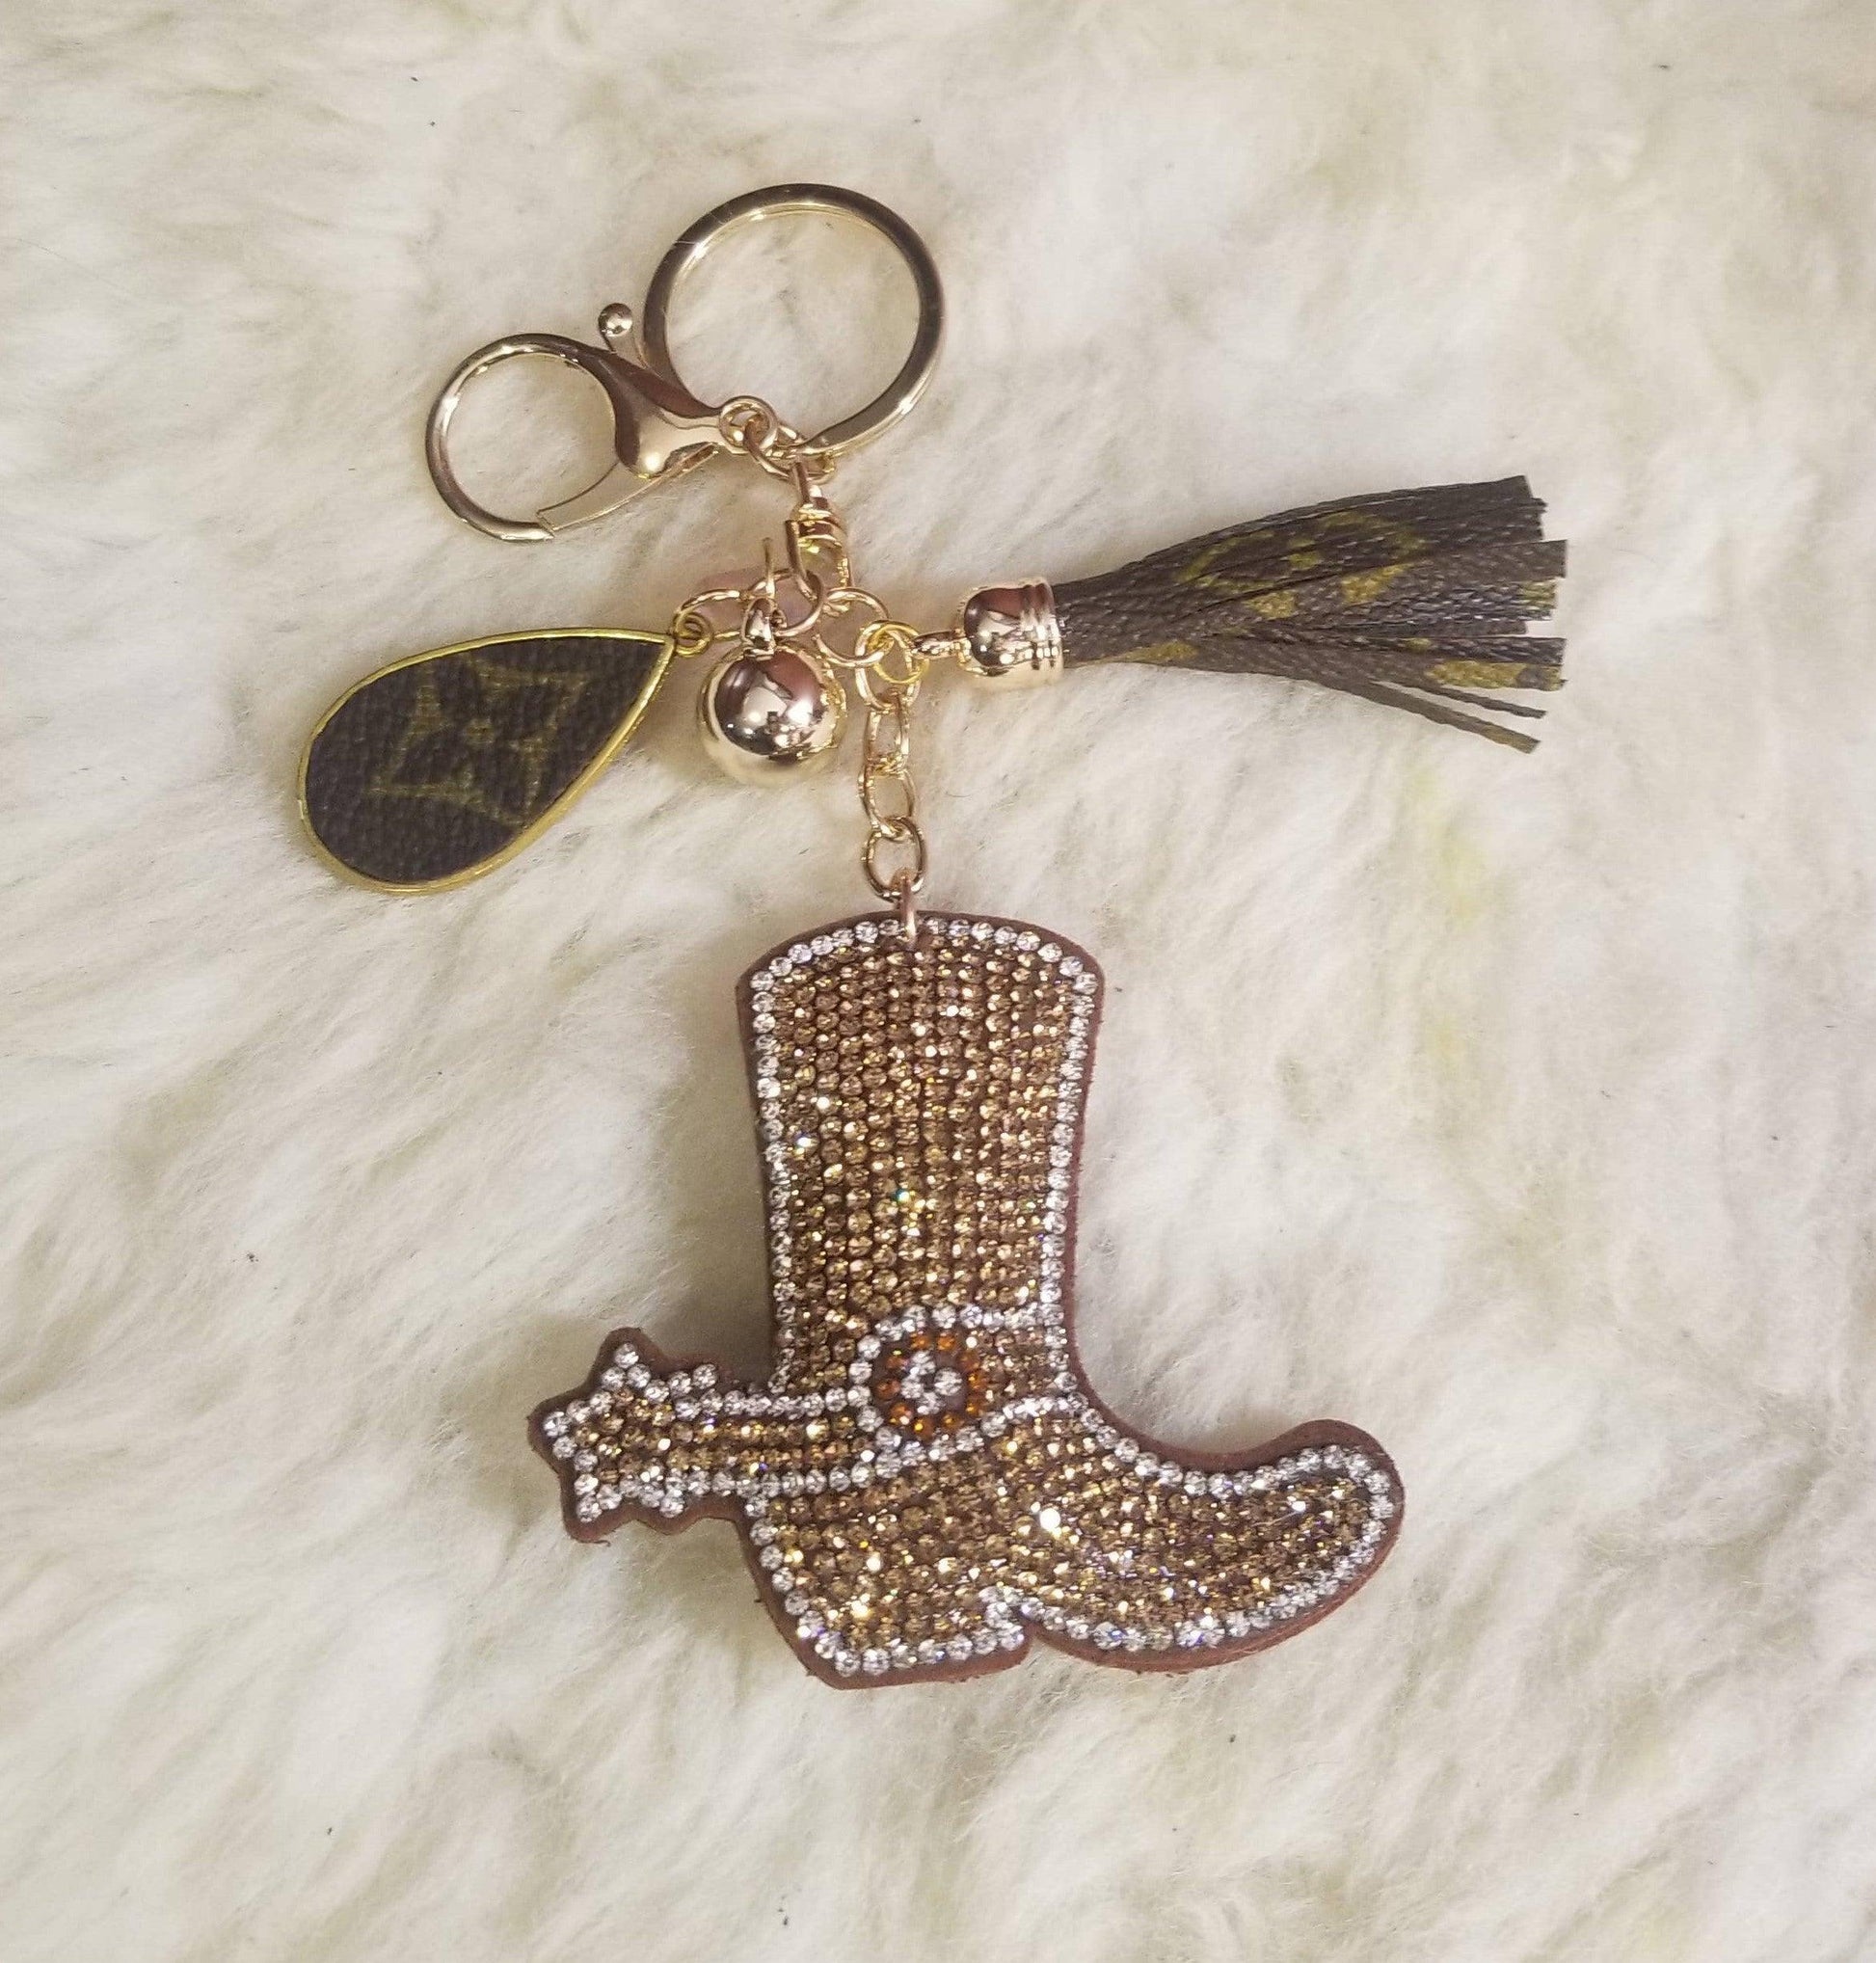 Repurposed/Upcycled Louis Vuitton Keychains